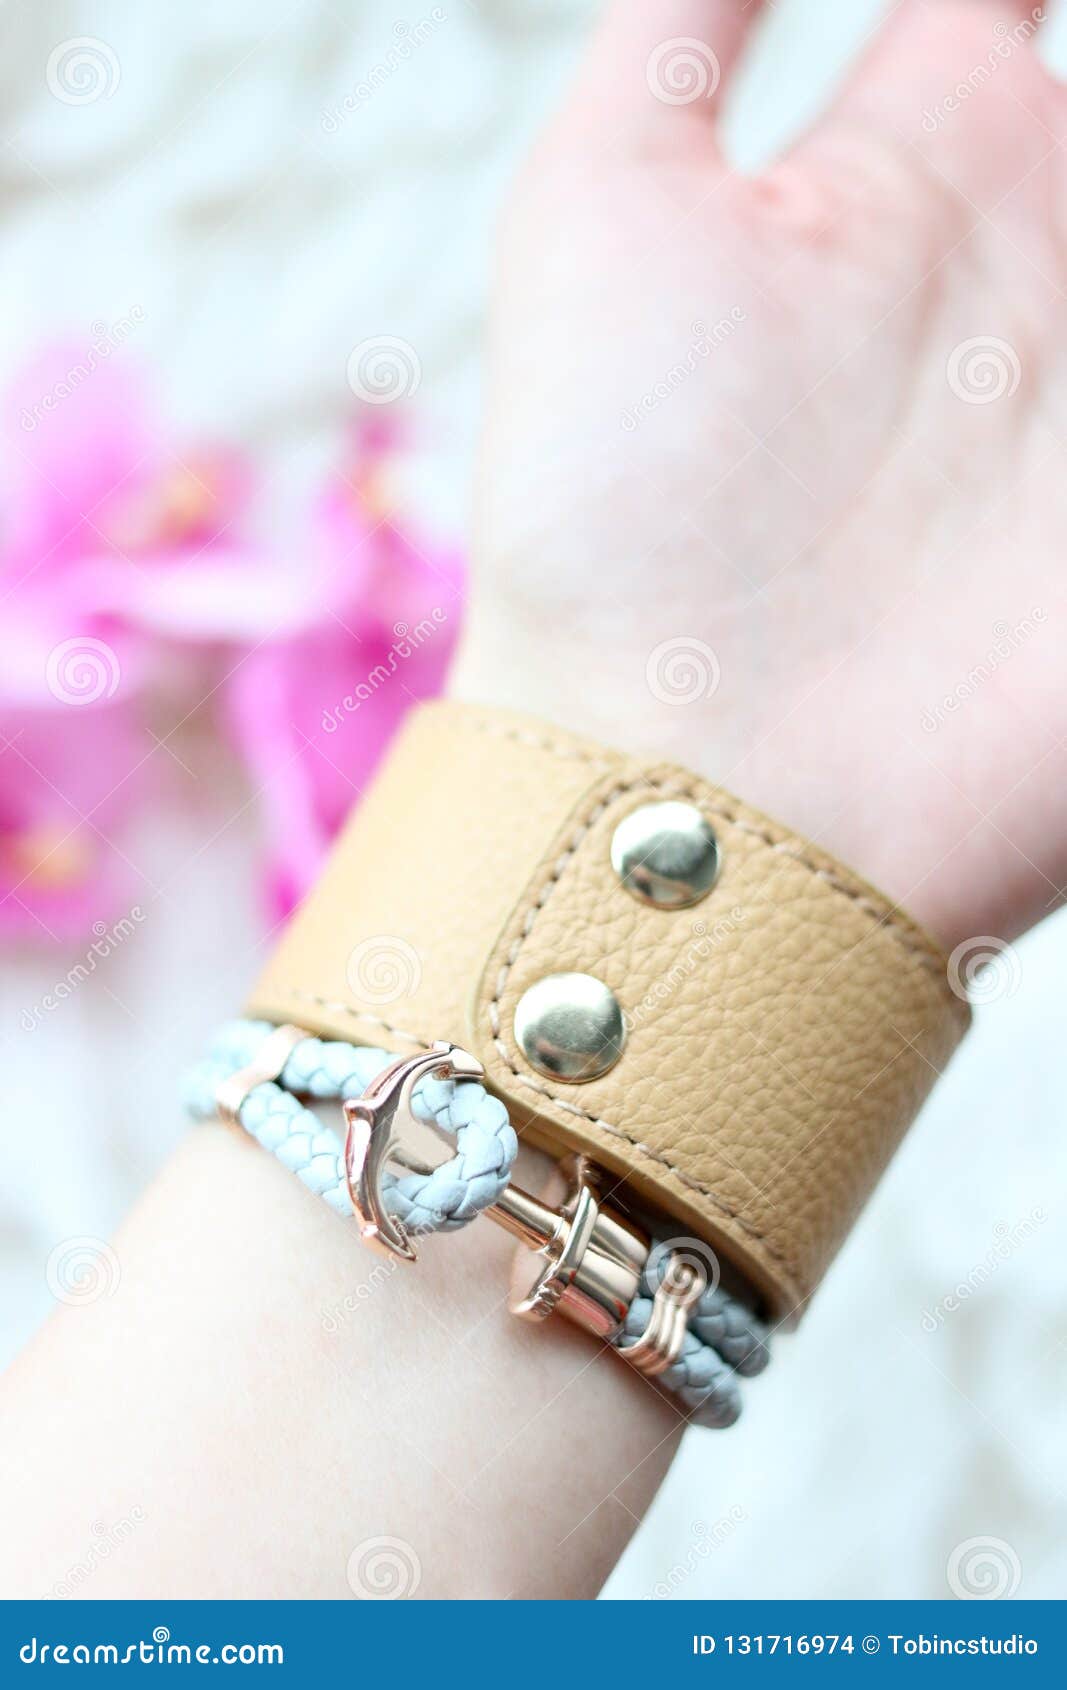 Buy VU100 Infinity Charm Best Friend Bracelets for 2 Women Girls Sister  Friends Long Distance Relationship Friendship Matching Bracelet Leather  Jewelry Gifts at Amazon.in